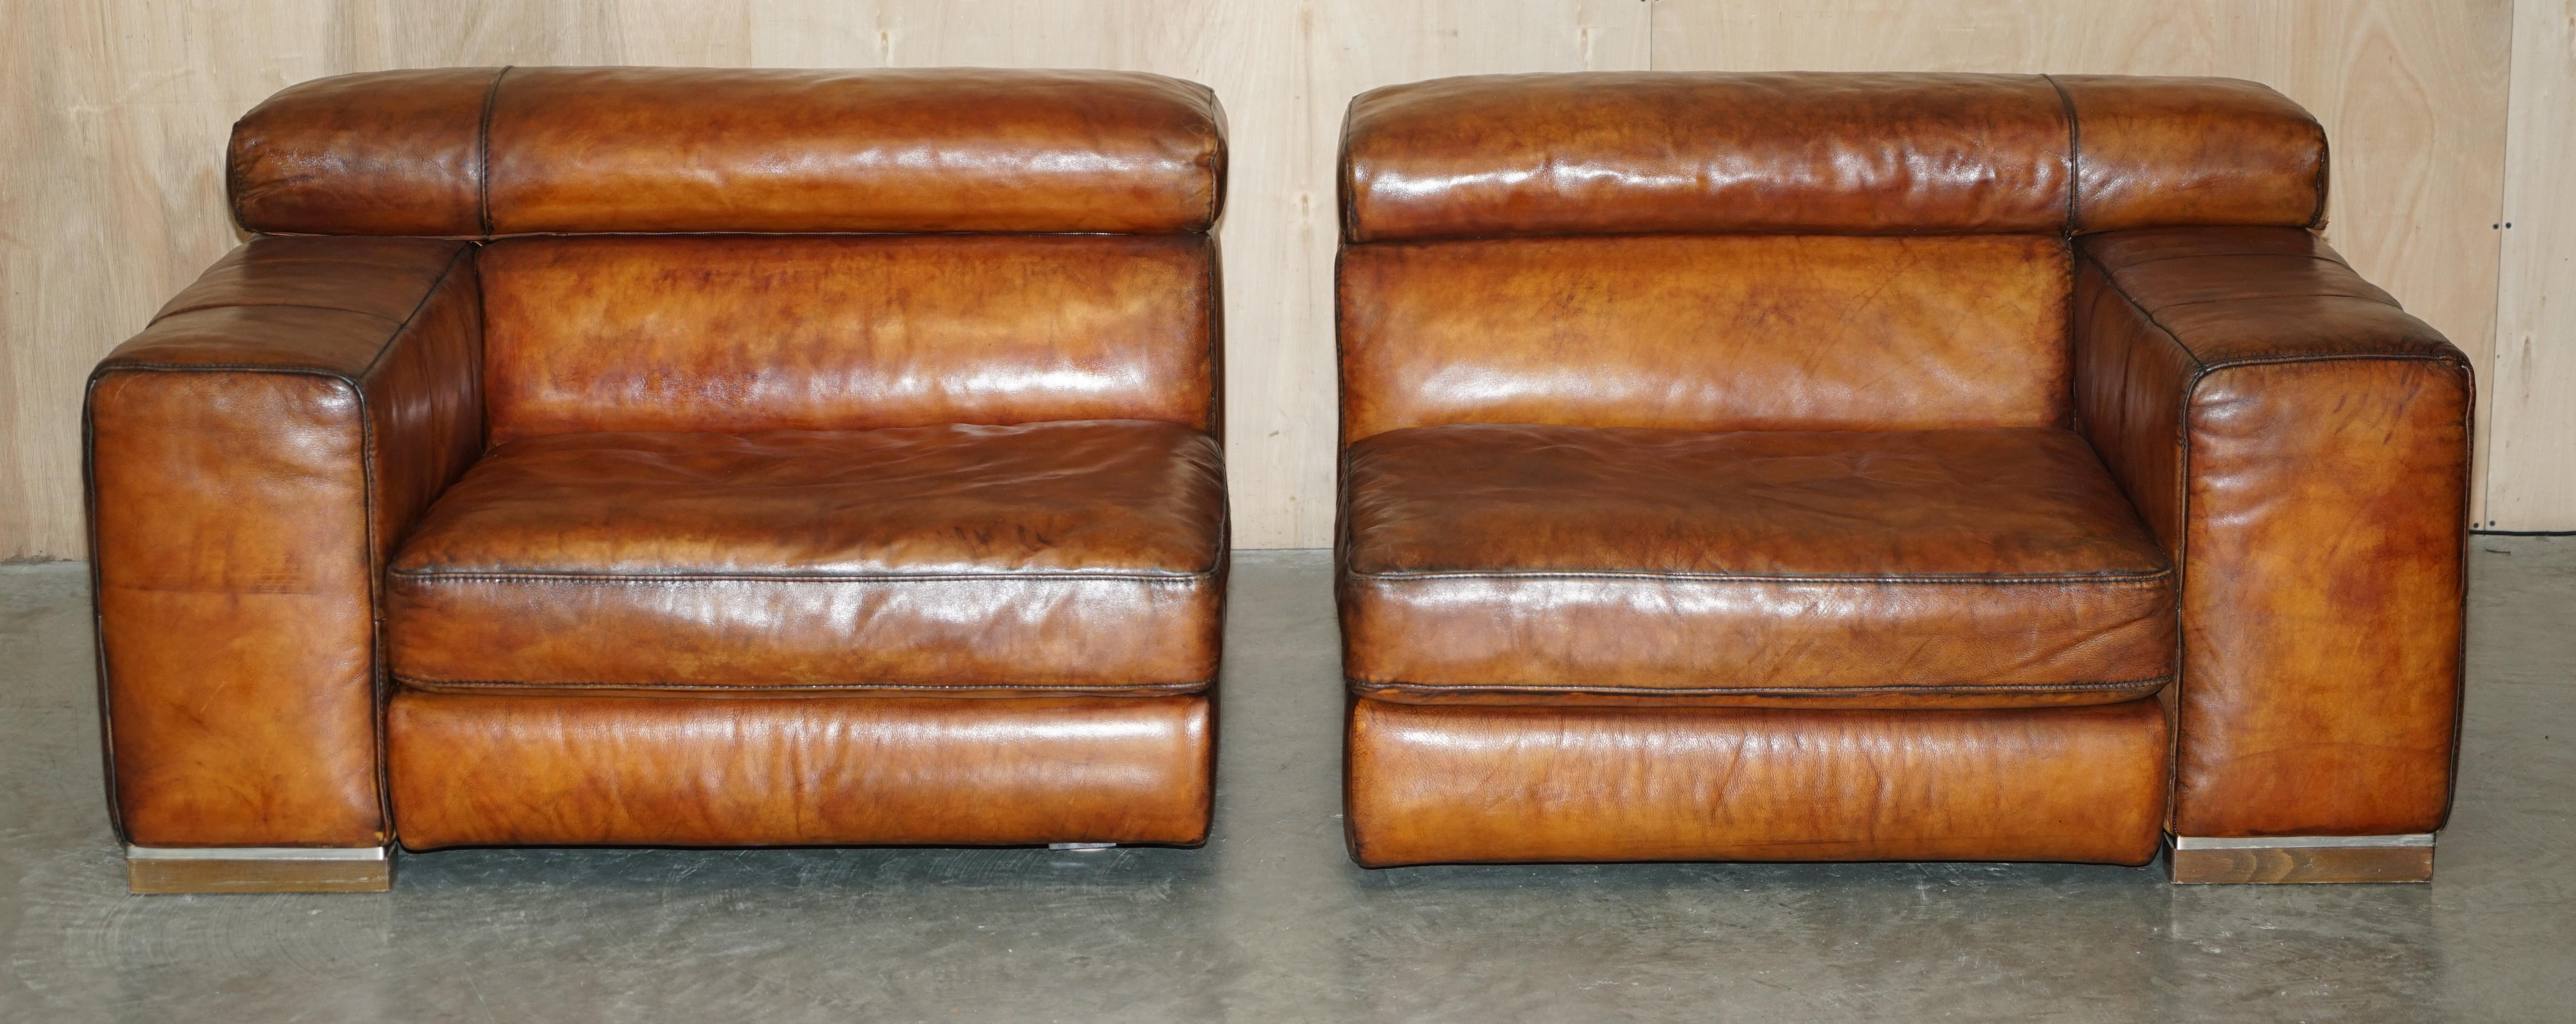 We are delighted to offer for sale this fully restored, one of a kind, Natuzzi Editions Roma, hand dyed cigar brown leather sofa with Electric rising headrest and small footrest that is part of a large suite.

This sofa is part of a suite as